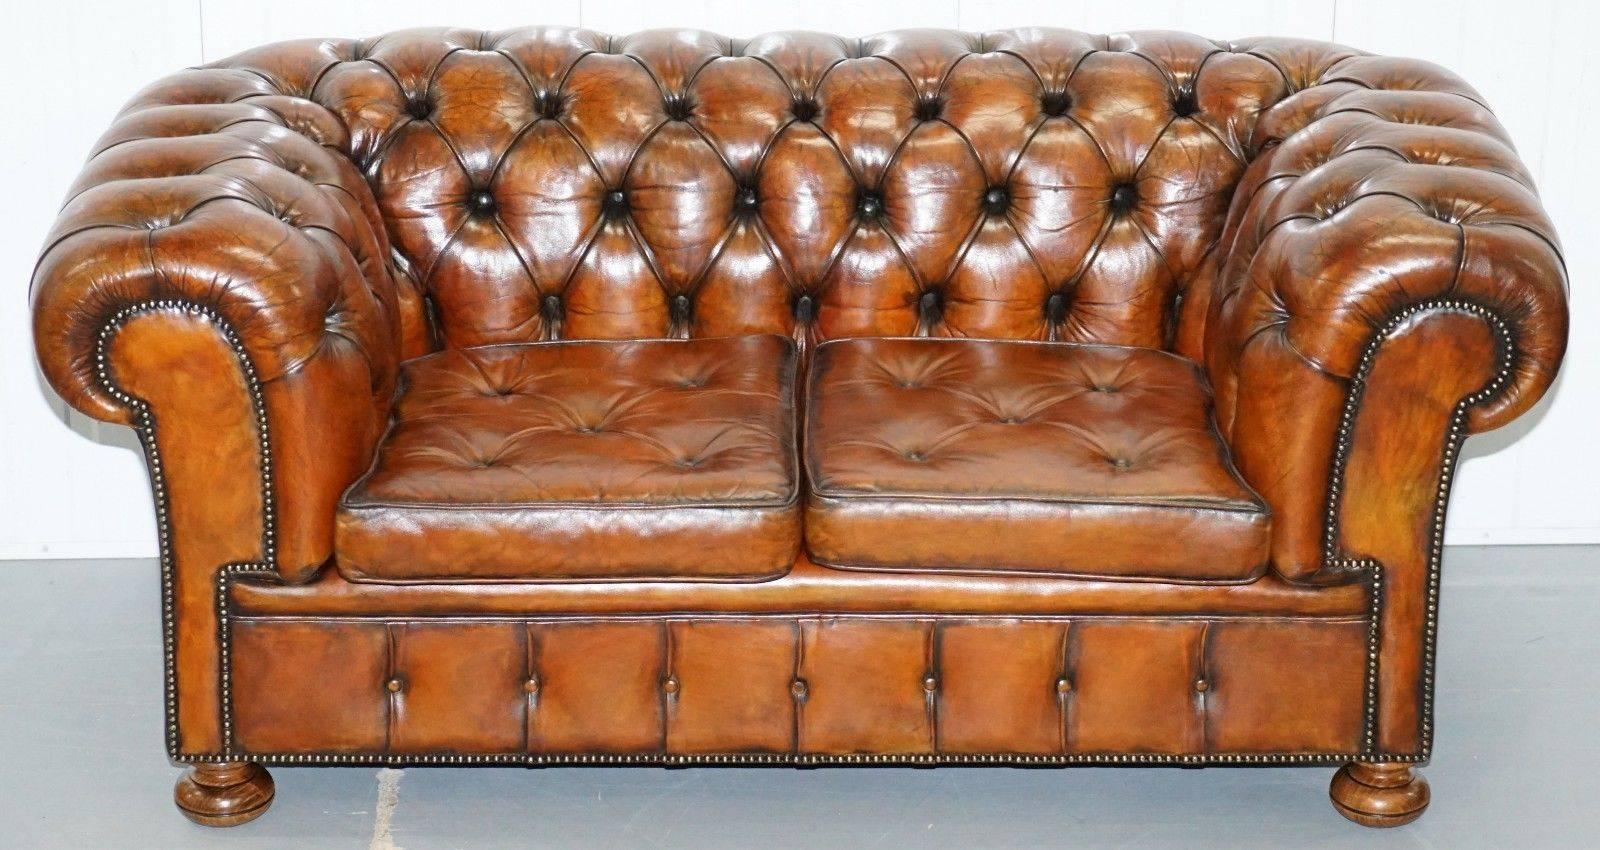 We are delighted to offer for sale this very rare absolutely stunning circa 1930s fully restored Chesterfield aged whiskey brown leather gentleman’s club sofa with Thomas Chippendale style floating buttoned seat cushions.

Where to begin… if